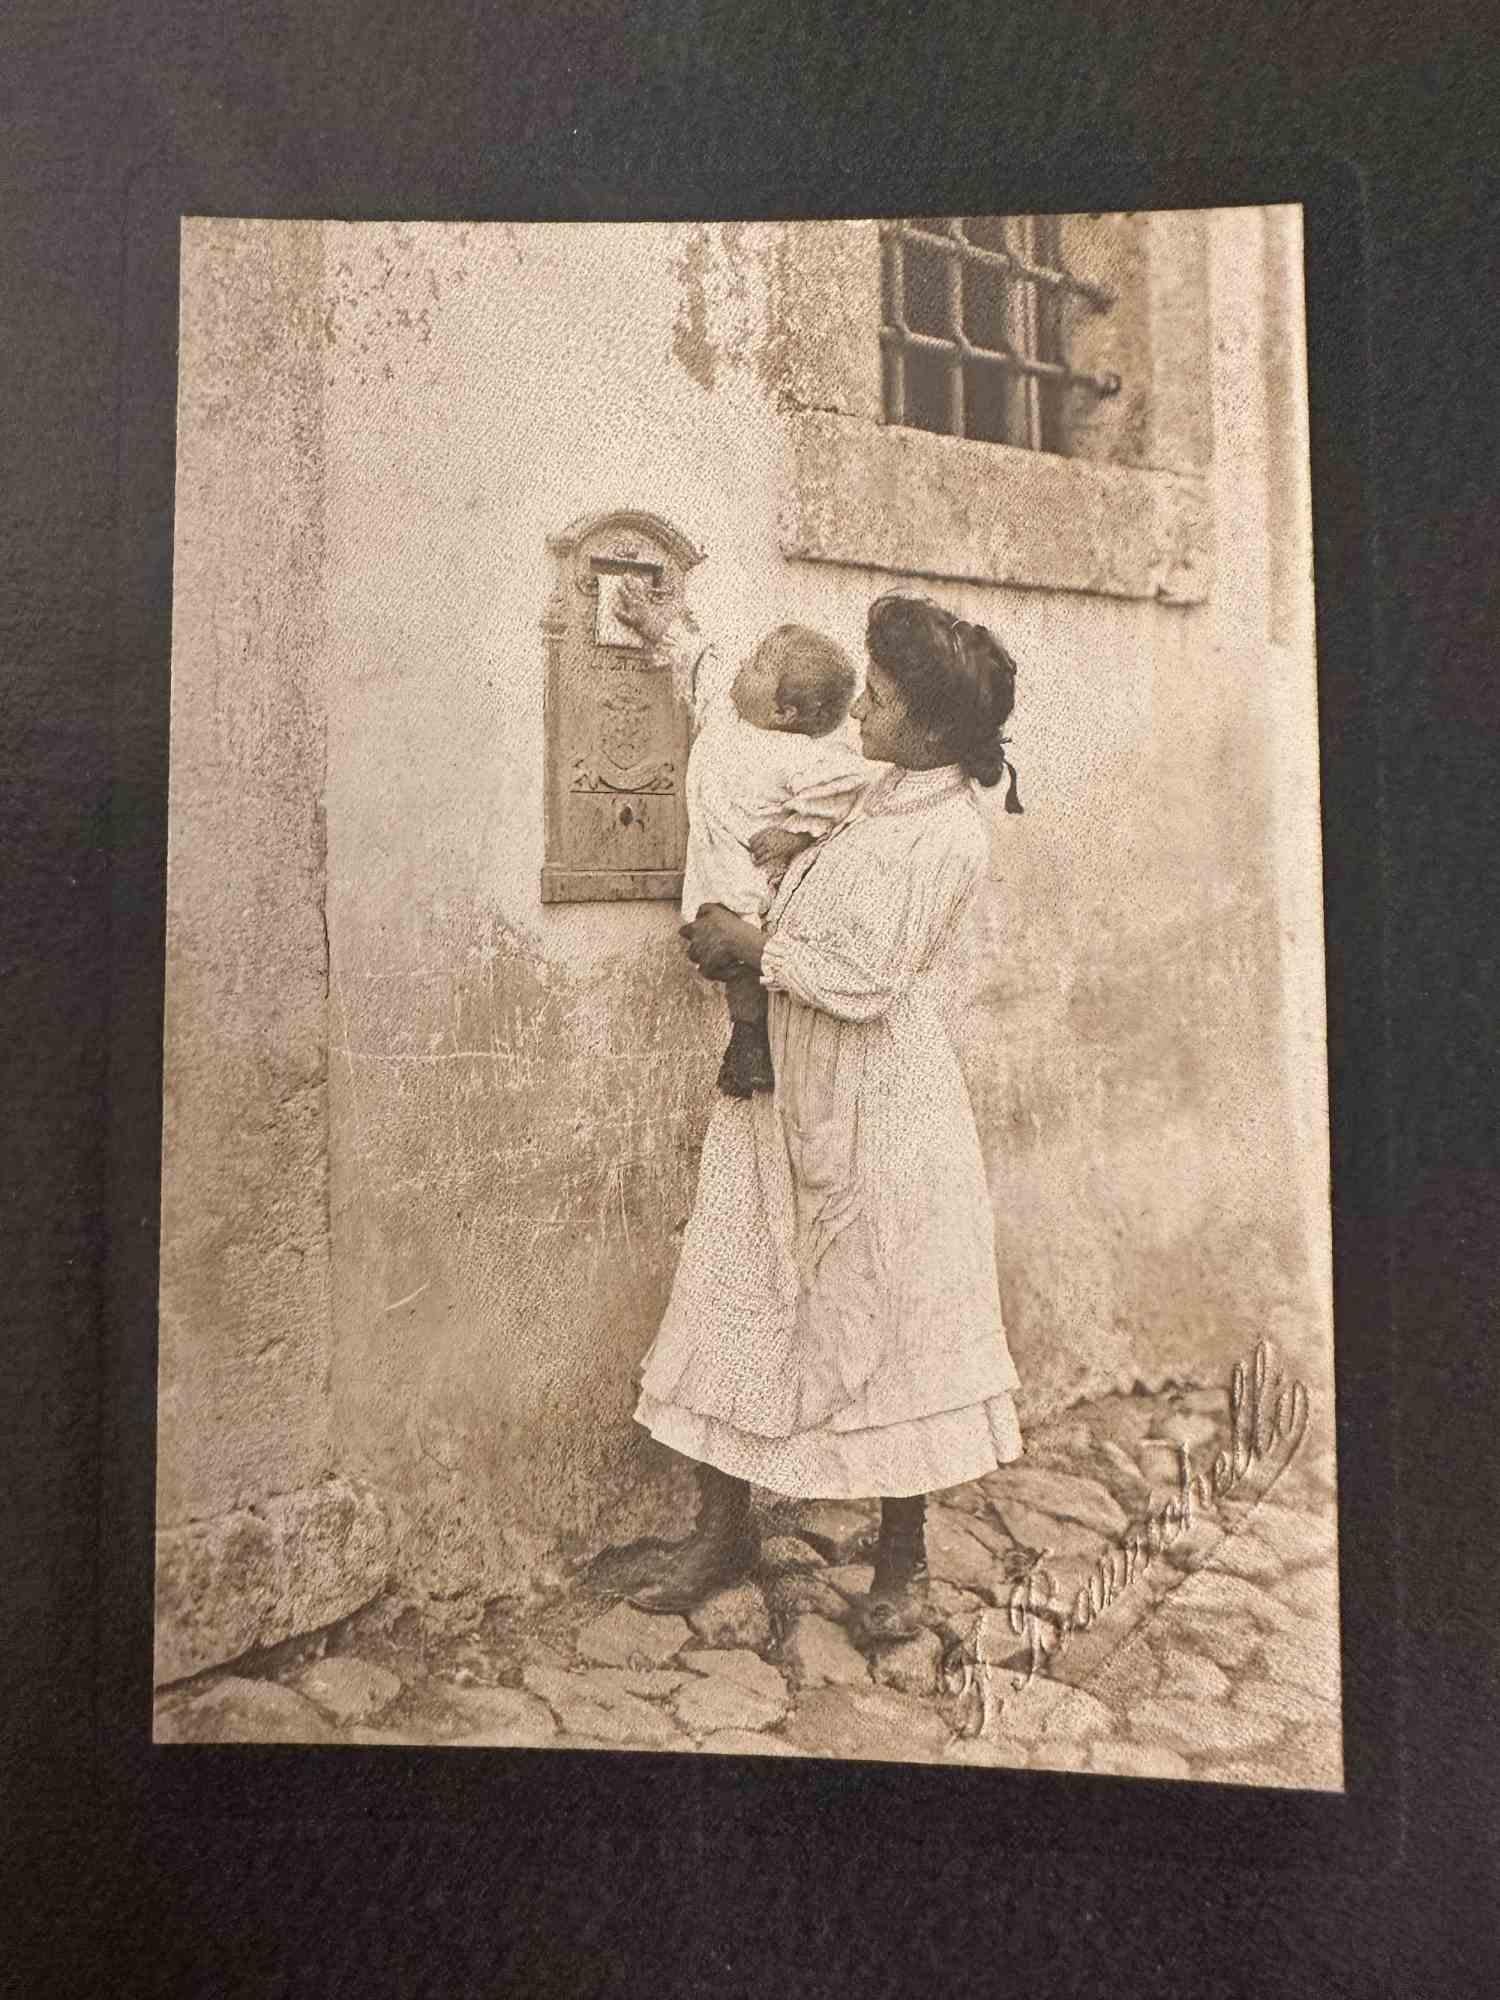 Unknown Figurative Photograph - The Old Days  Photo - Girl and Child - Early 20th Century